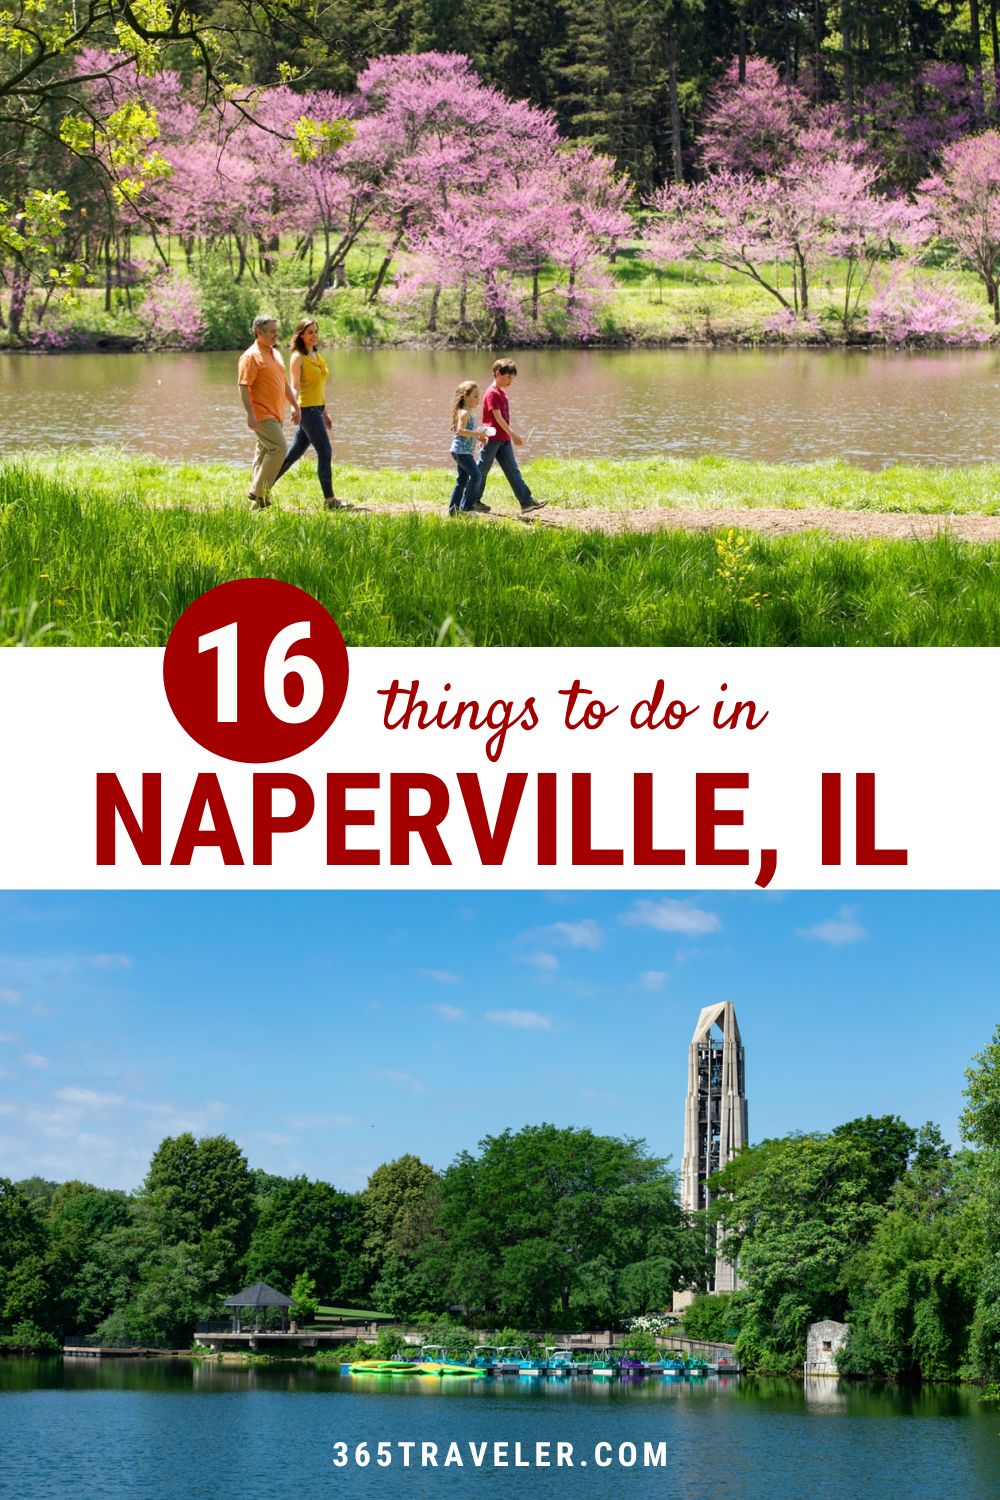 16 FUN THINGS TO DO IN NAPERVILLE, IL YOU'LL LOVE